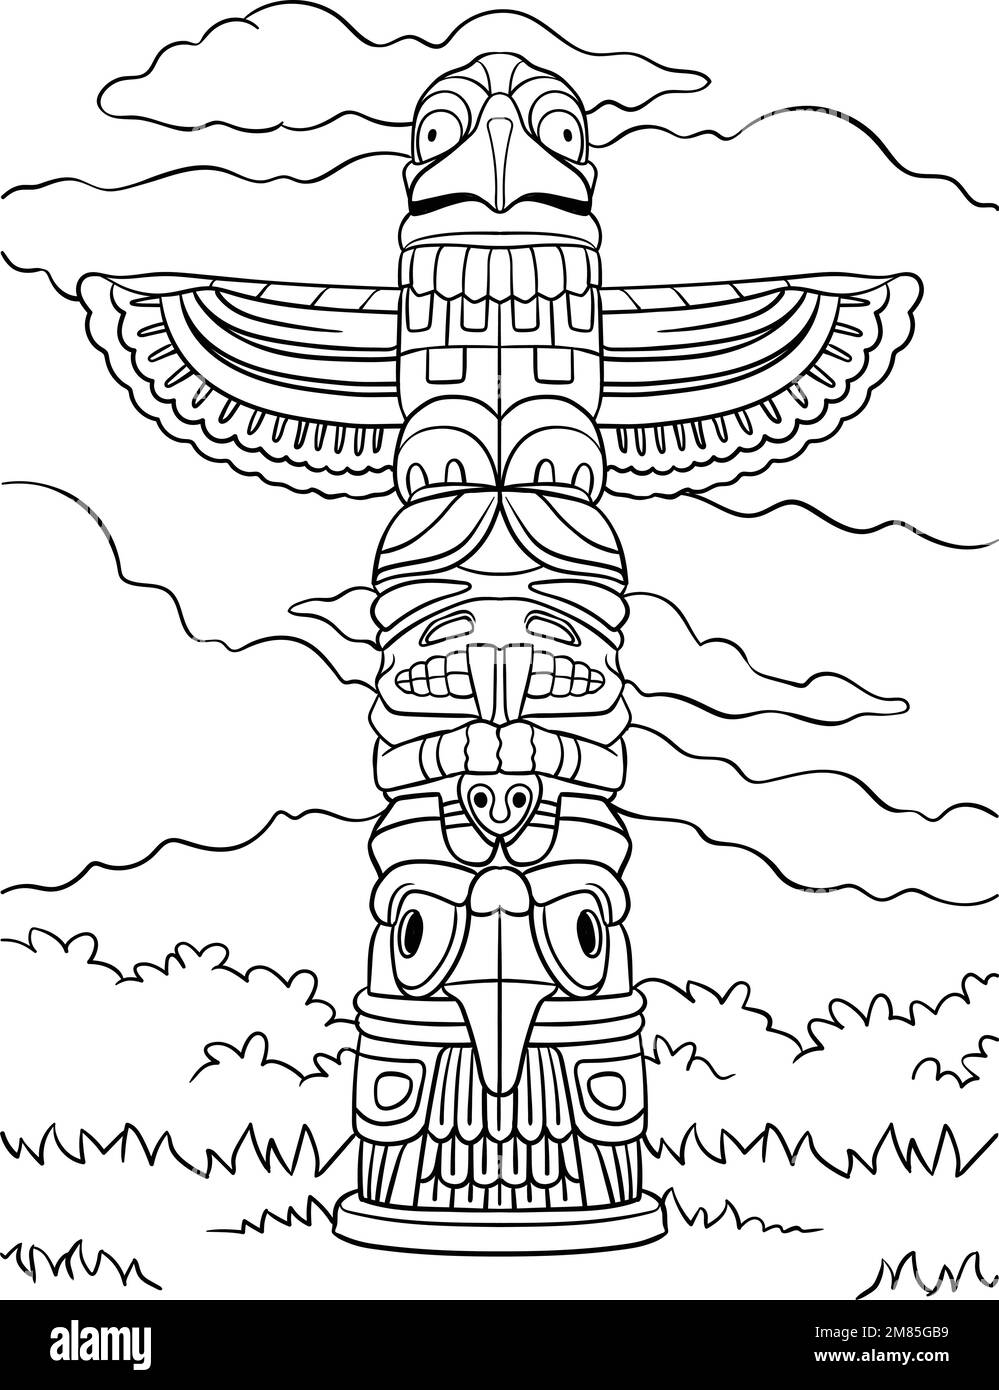 Native American Indian Totem Coloring Page Stock Vector